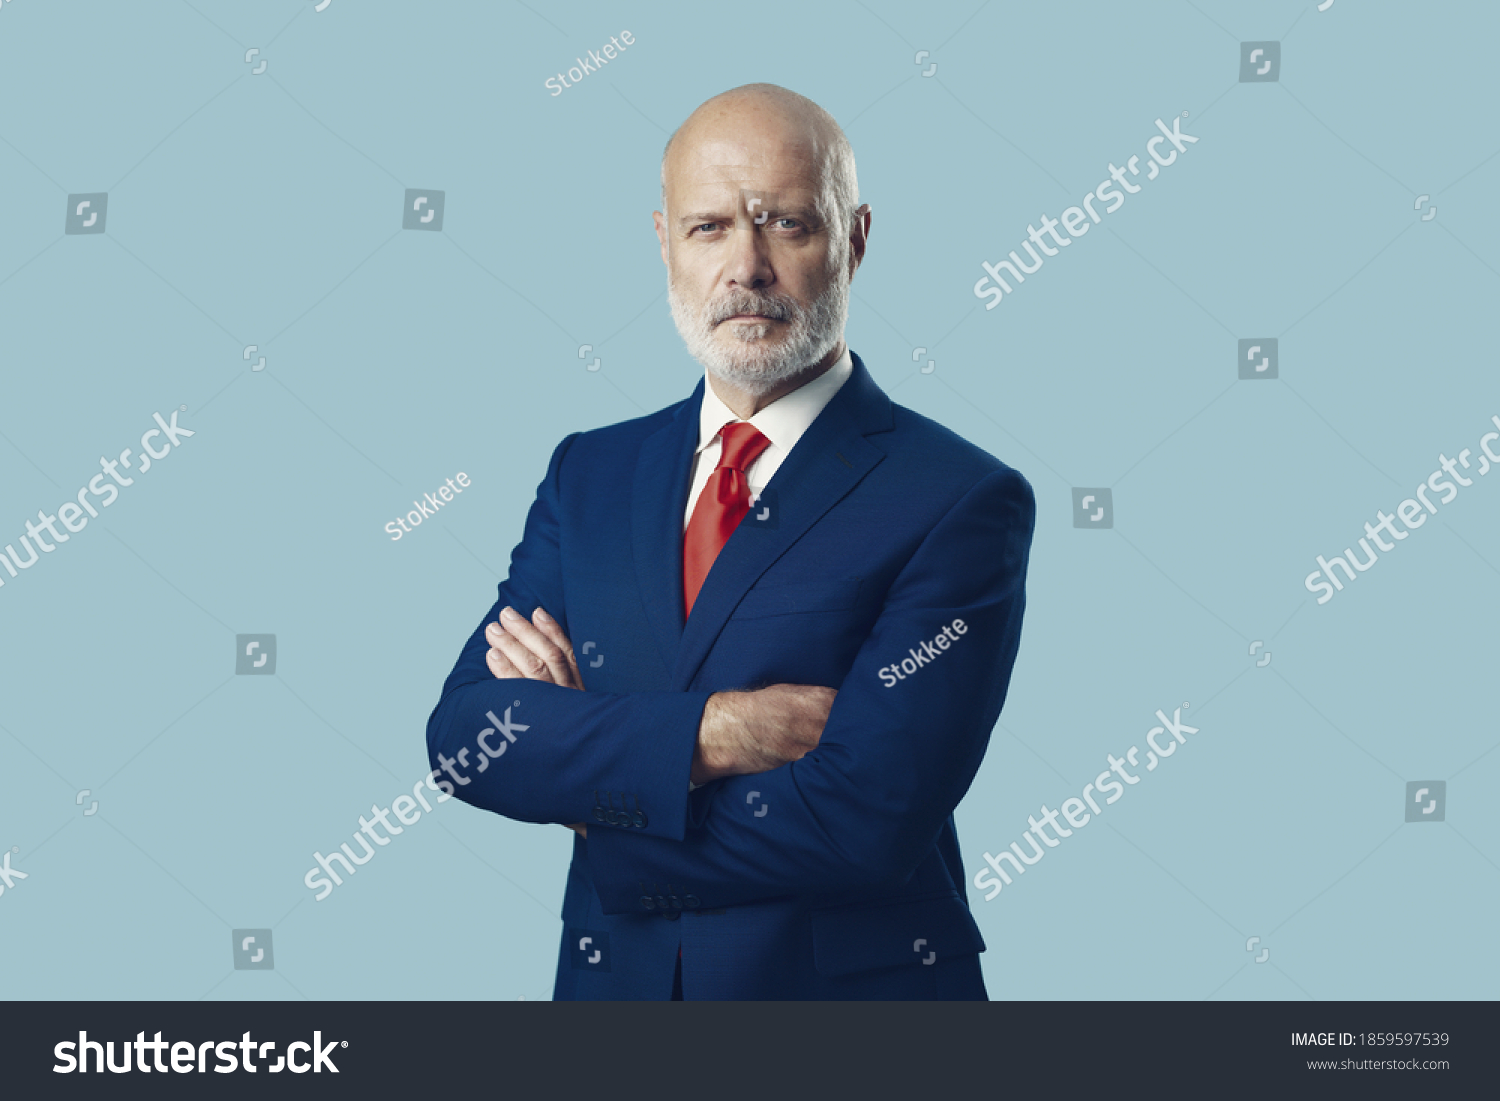 Confident corporate businessman or politician posing and looking at camera #1859597539